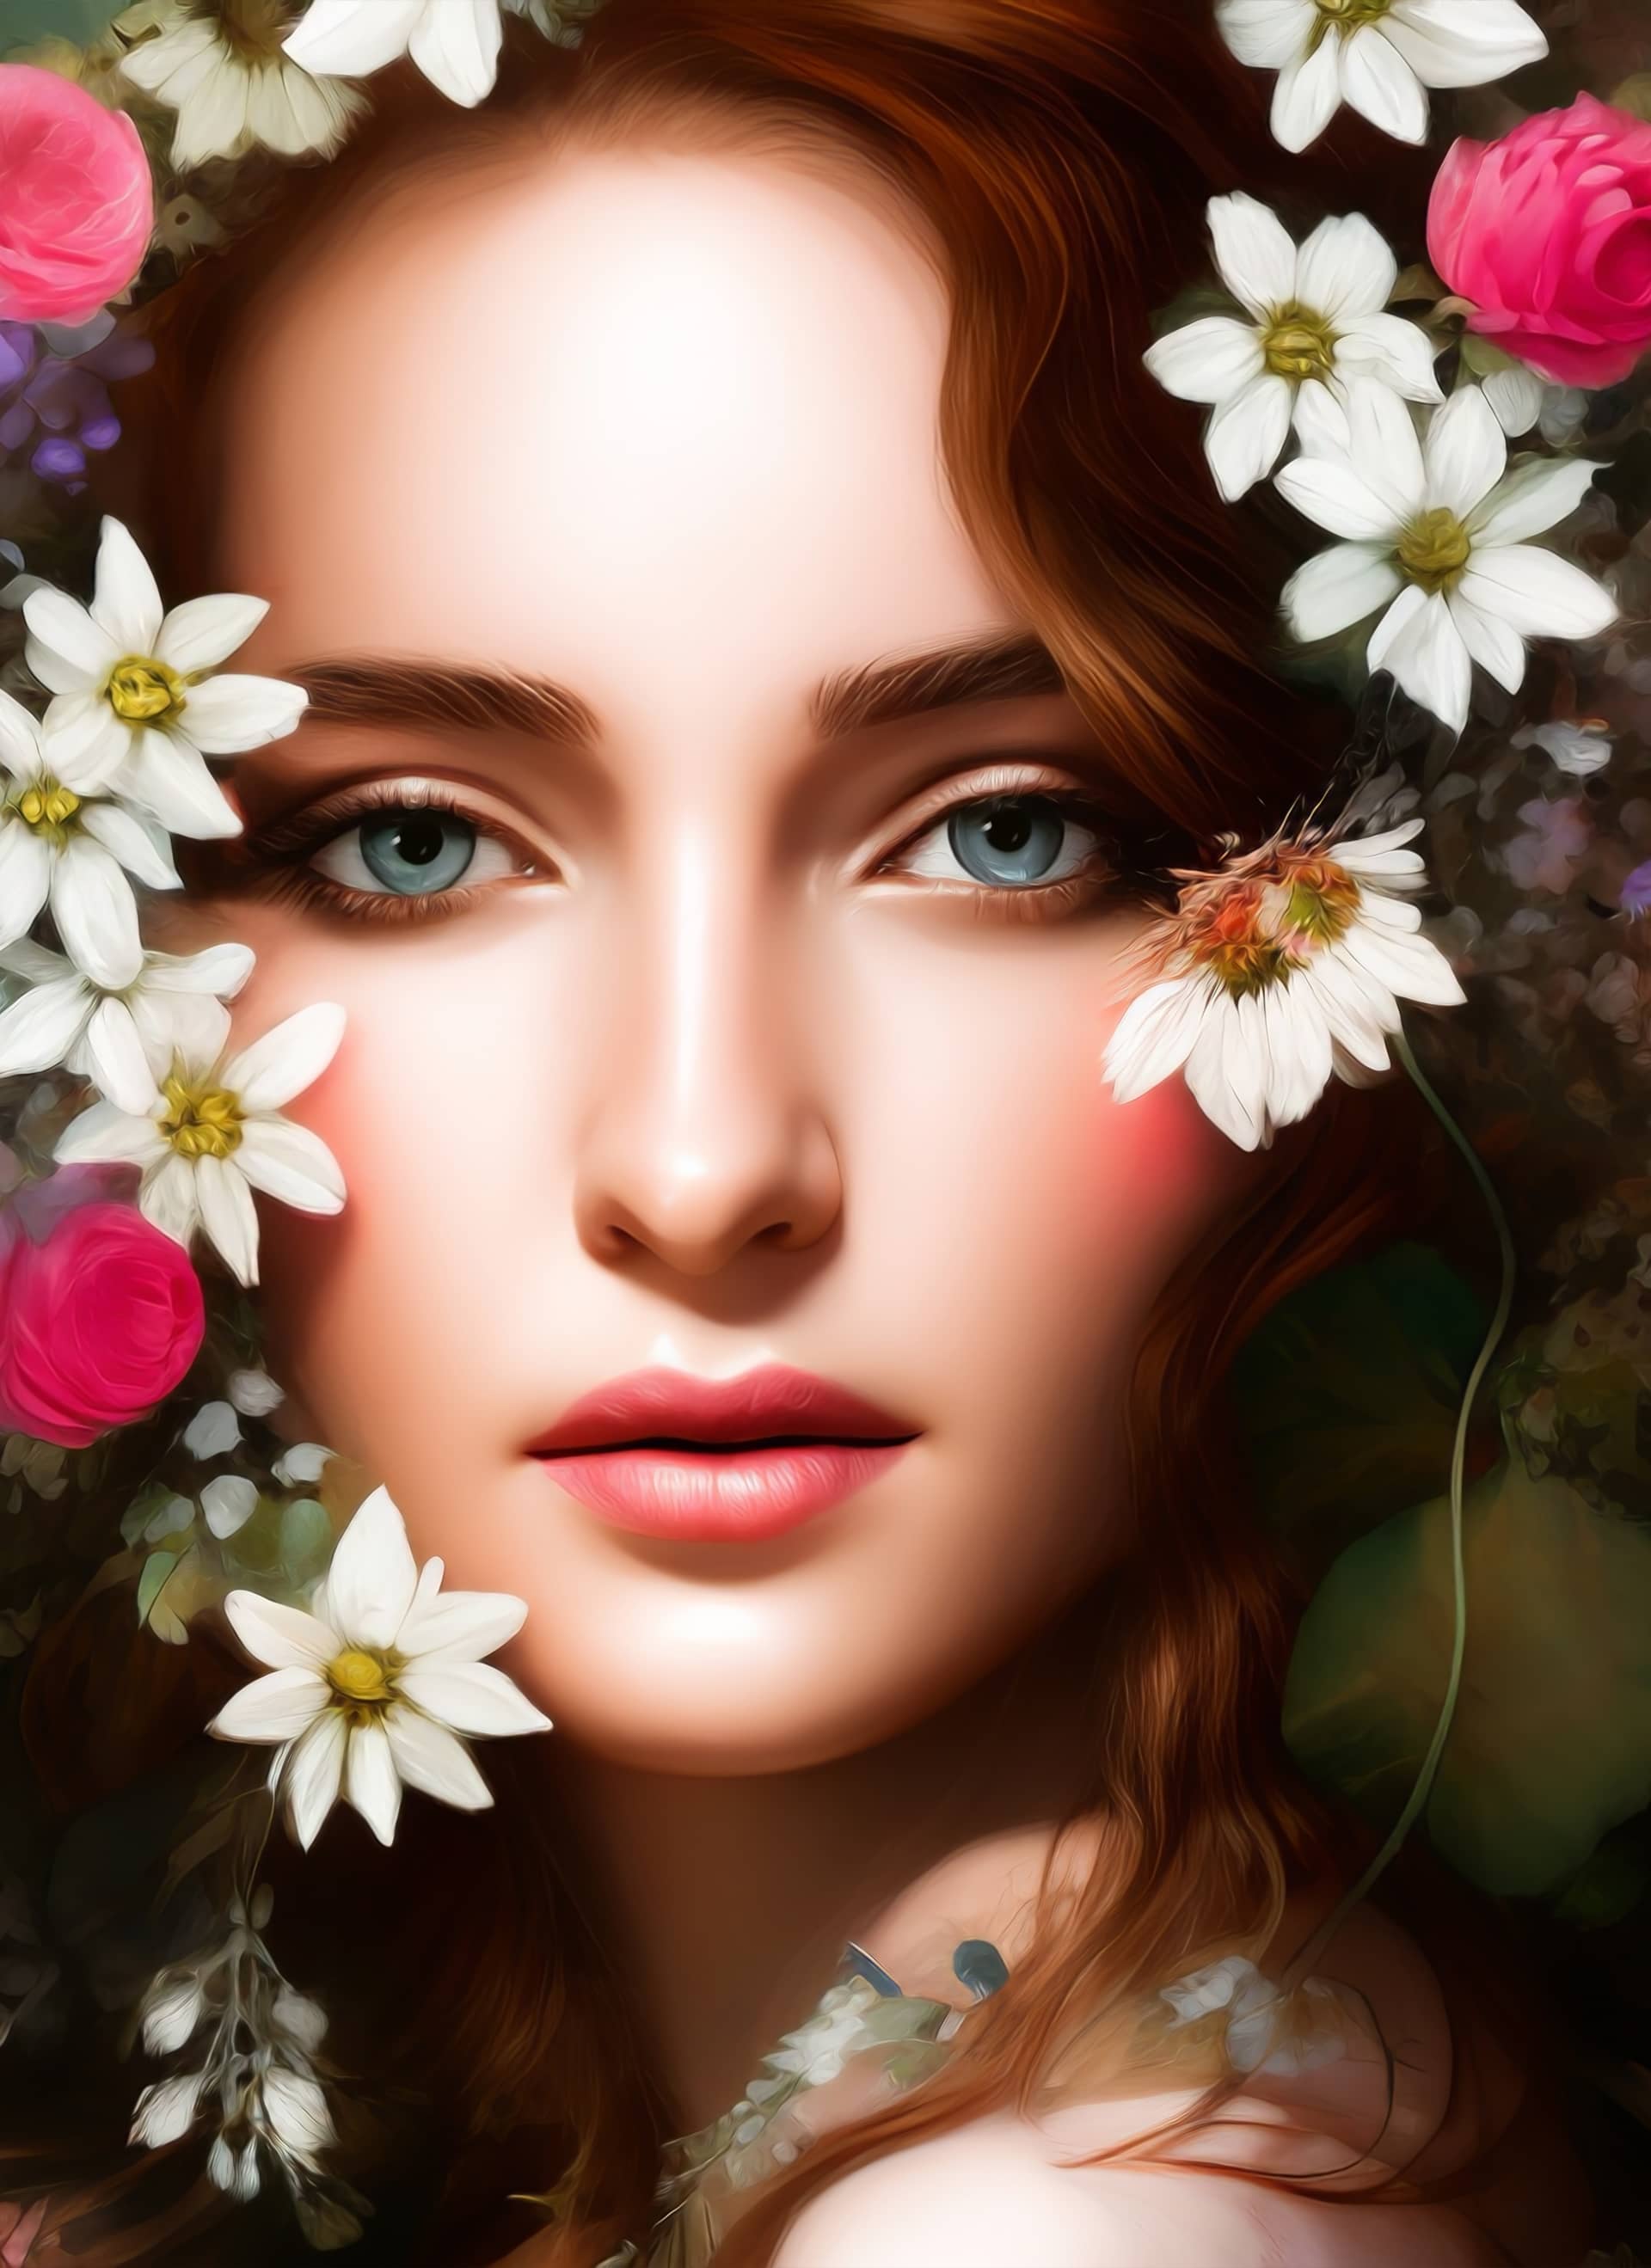 Painting beautiful woman s face portrait beautiful woman with flowers